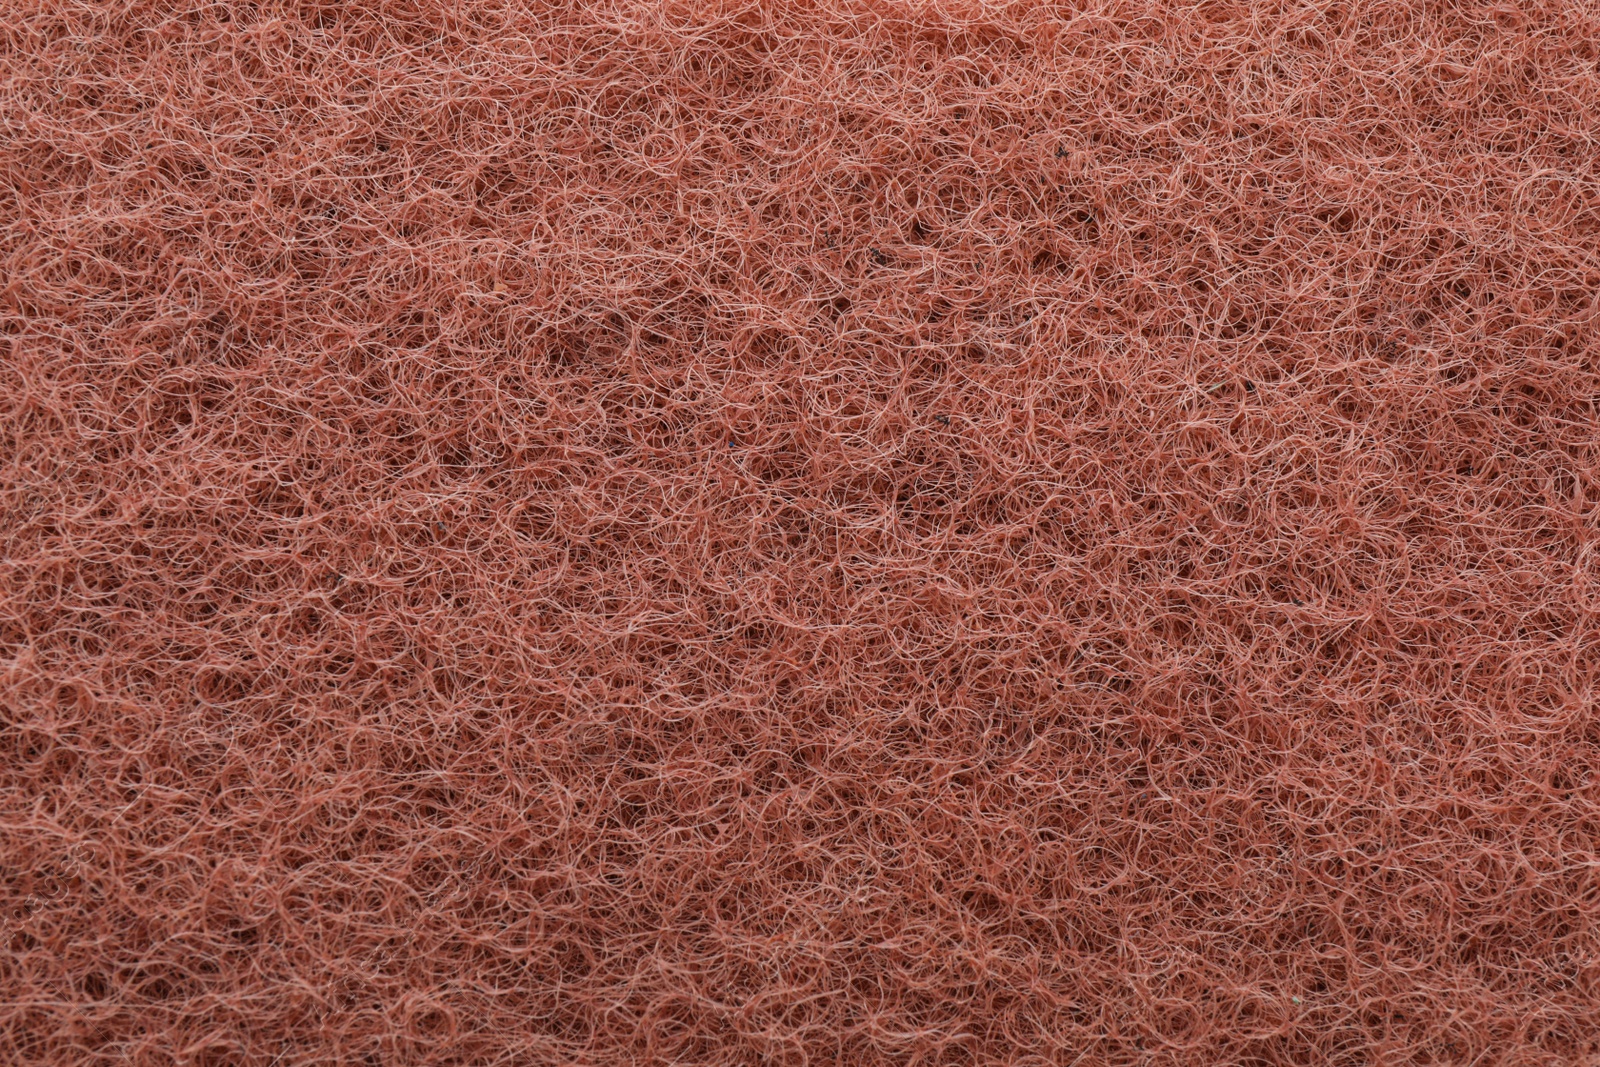 Photo of Brown abrasive cleaning sponge as background, top view